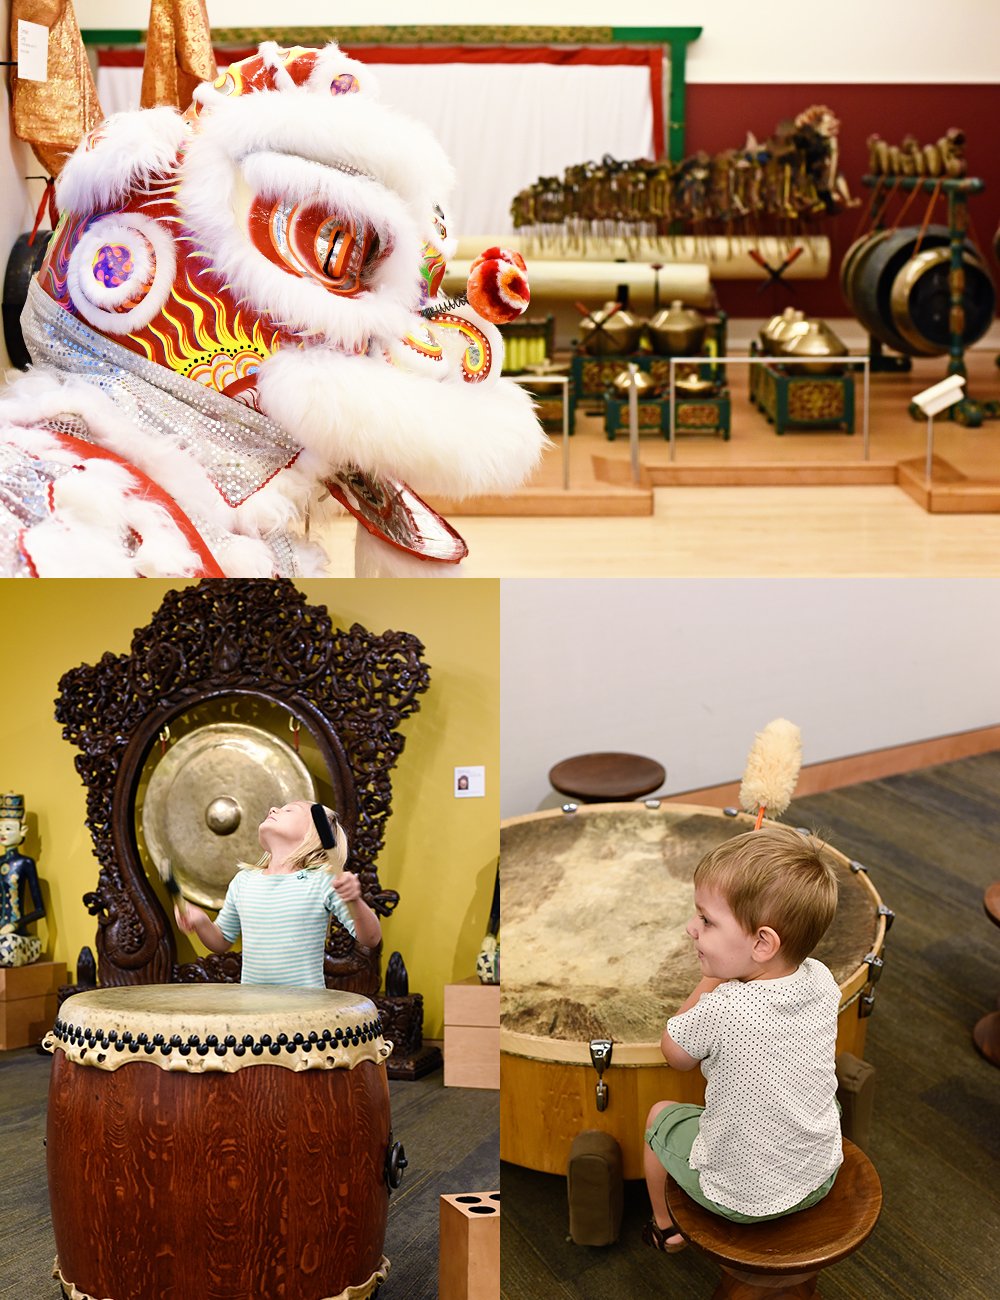 Guide to visiting the MIM (Musical Instrument Museum) in Scottsdale, Arizona: regalia and instruments to look at and some to play as well!